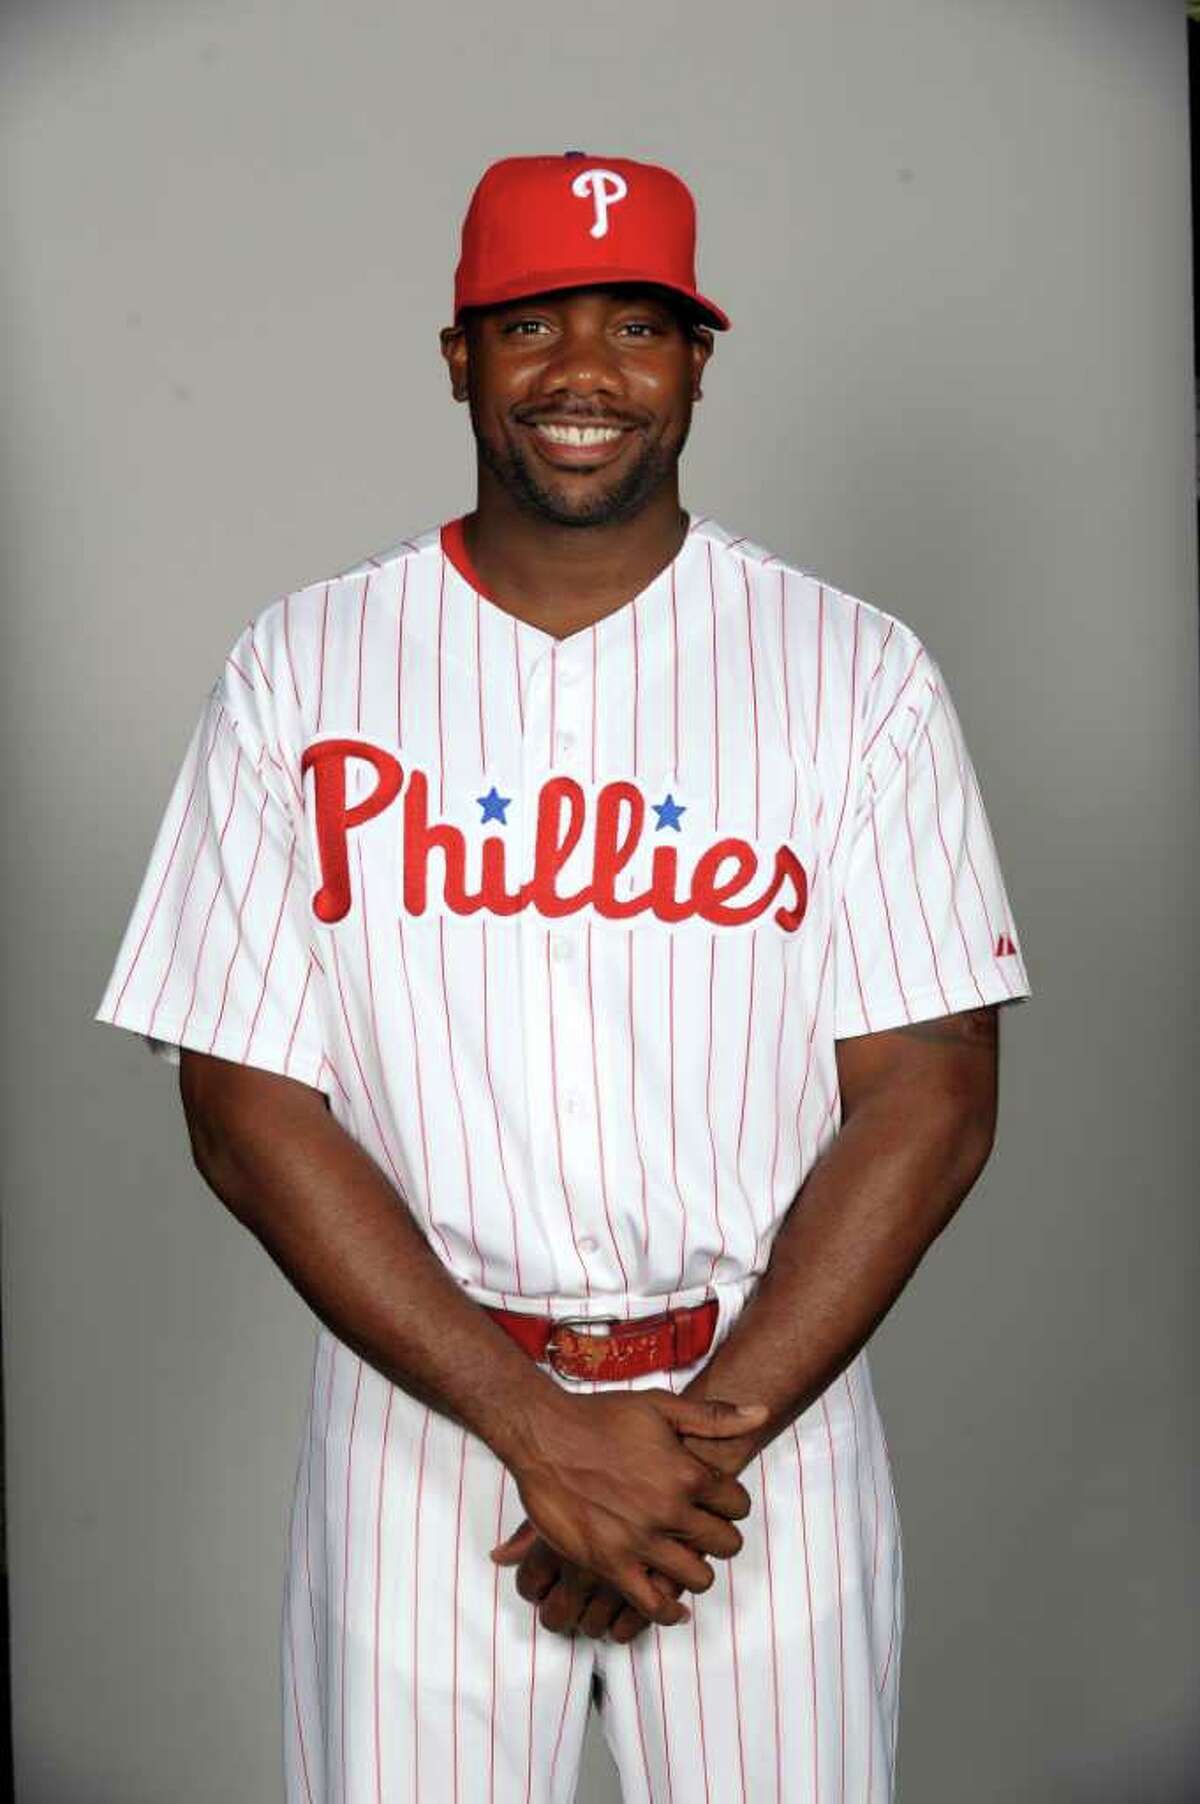 Phillies: Will Ryan Howard's Number 6 Be Retired?